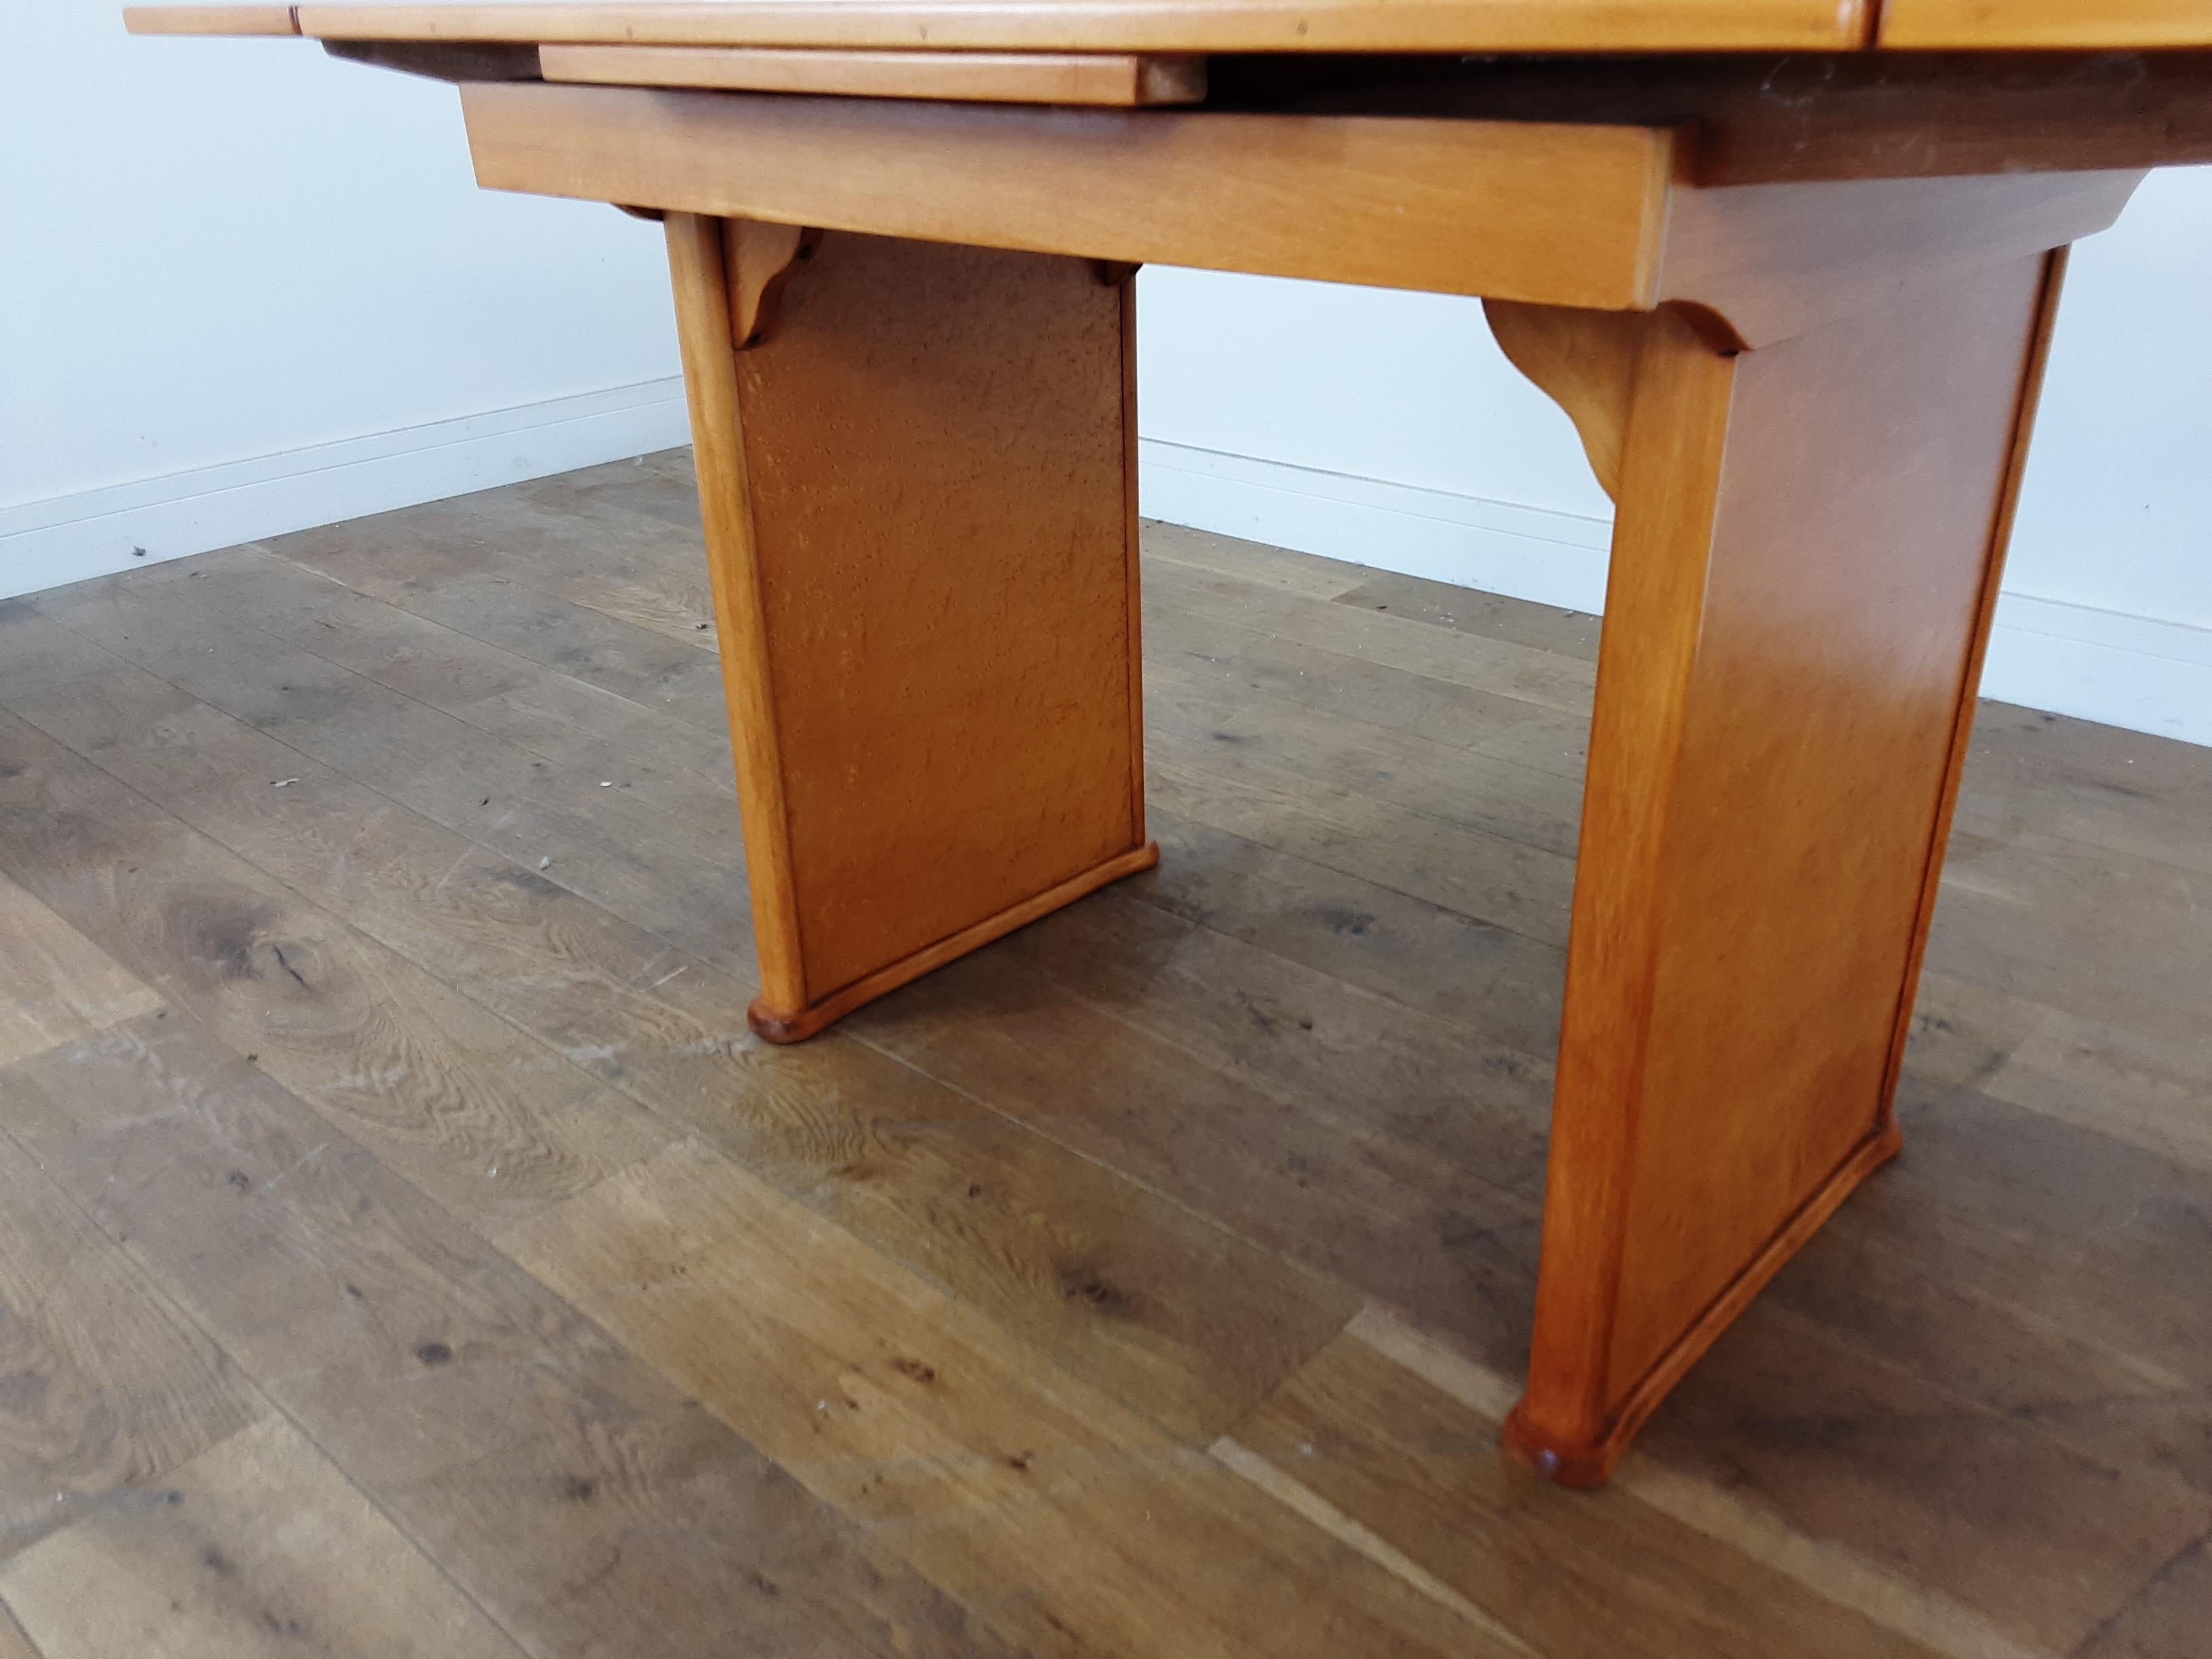 British Art Deco Extendable Dining Table in Bird's-Eye Maple with Walnut Trims For Sale 3